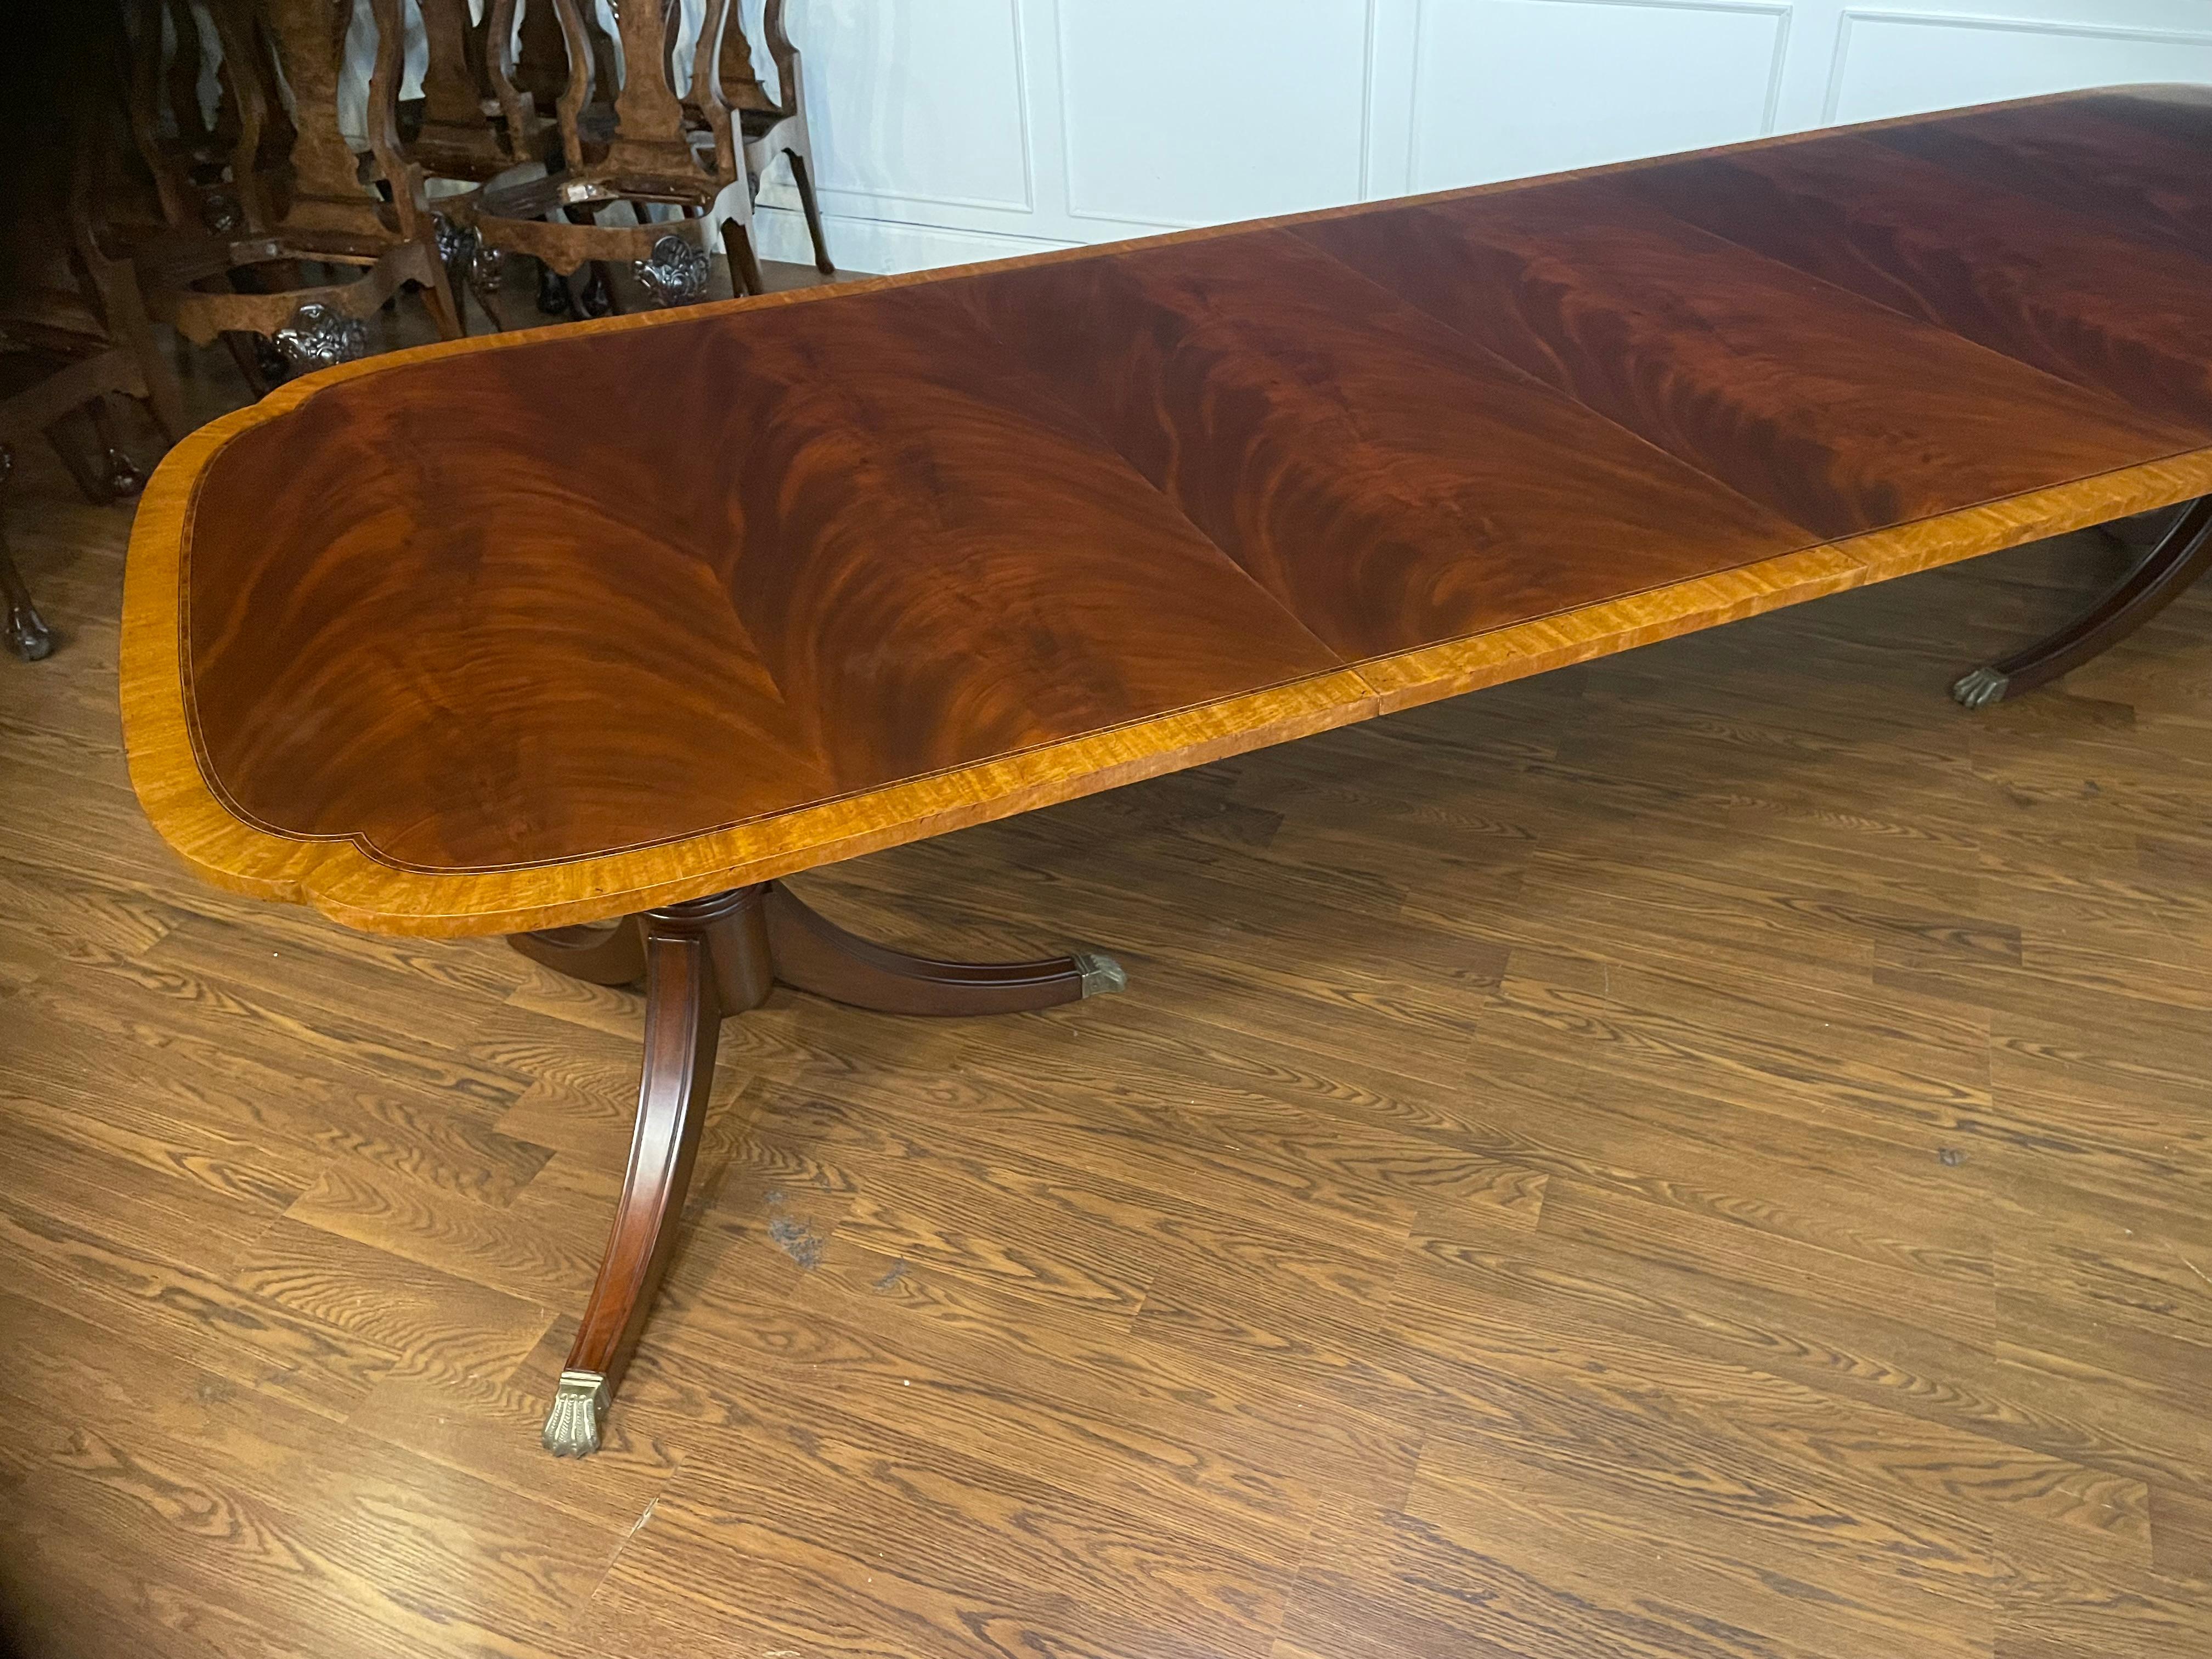 American Mahogany Scallop Cornered Dining Table by Leighton Hall - Showroom Sample